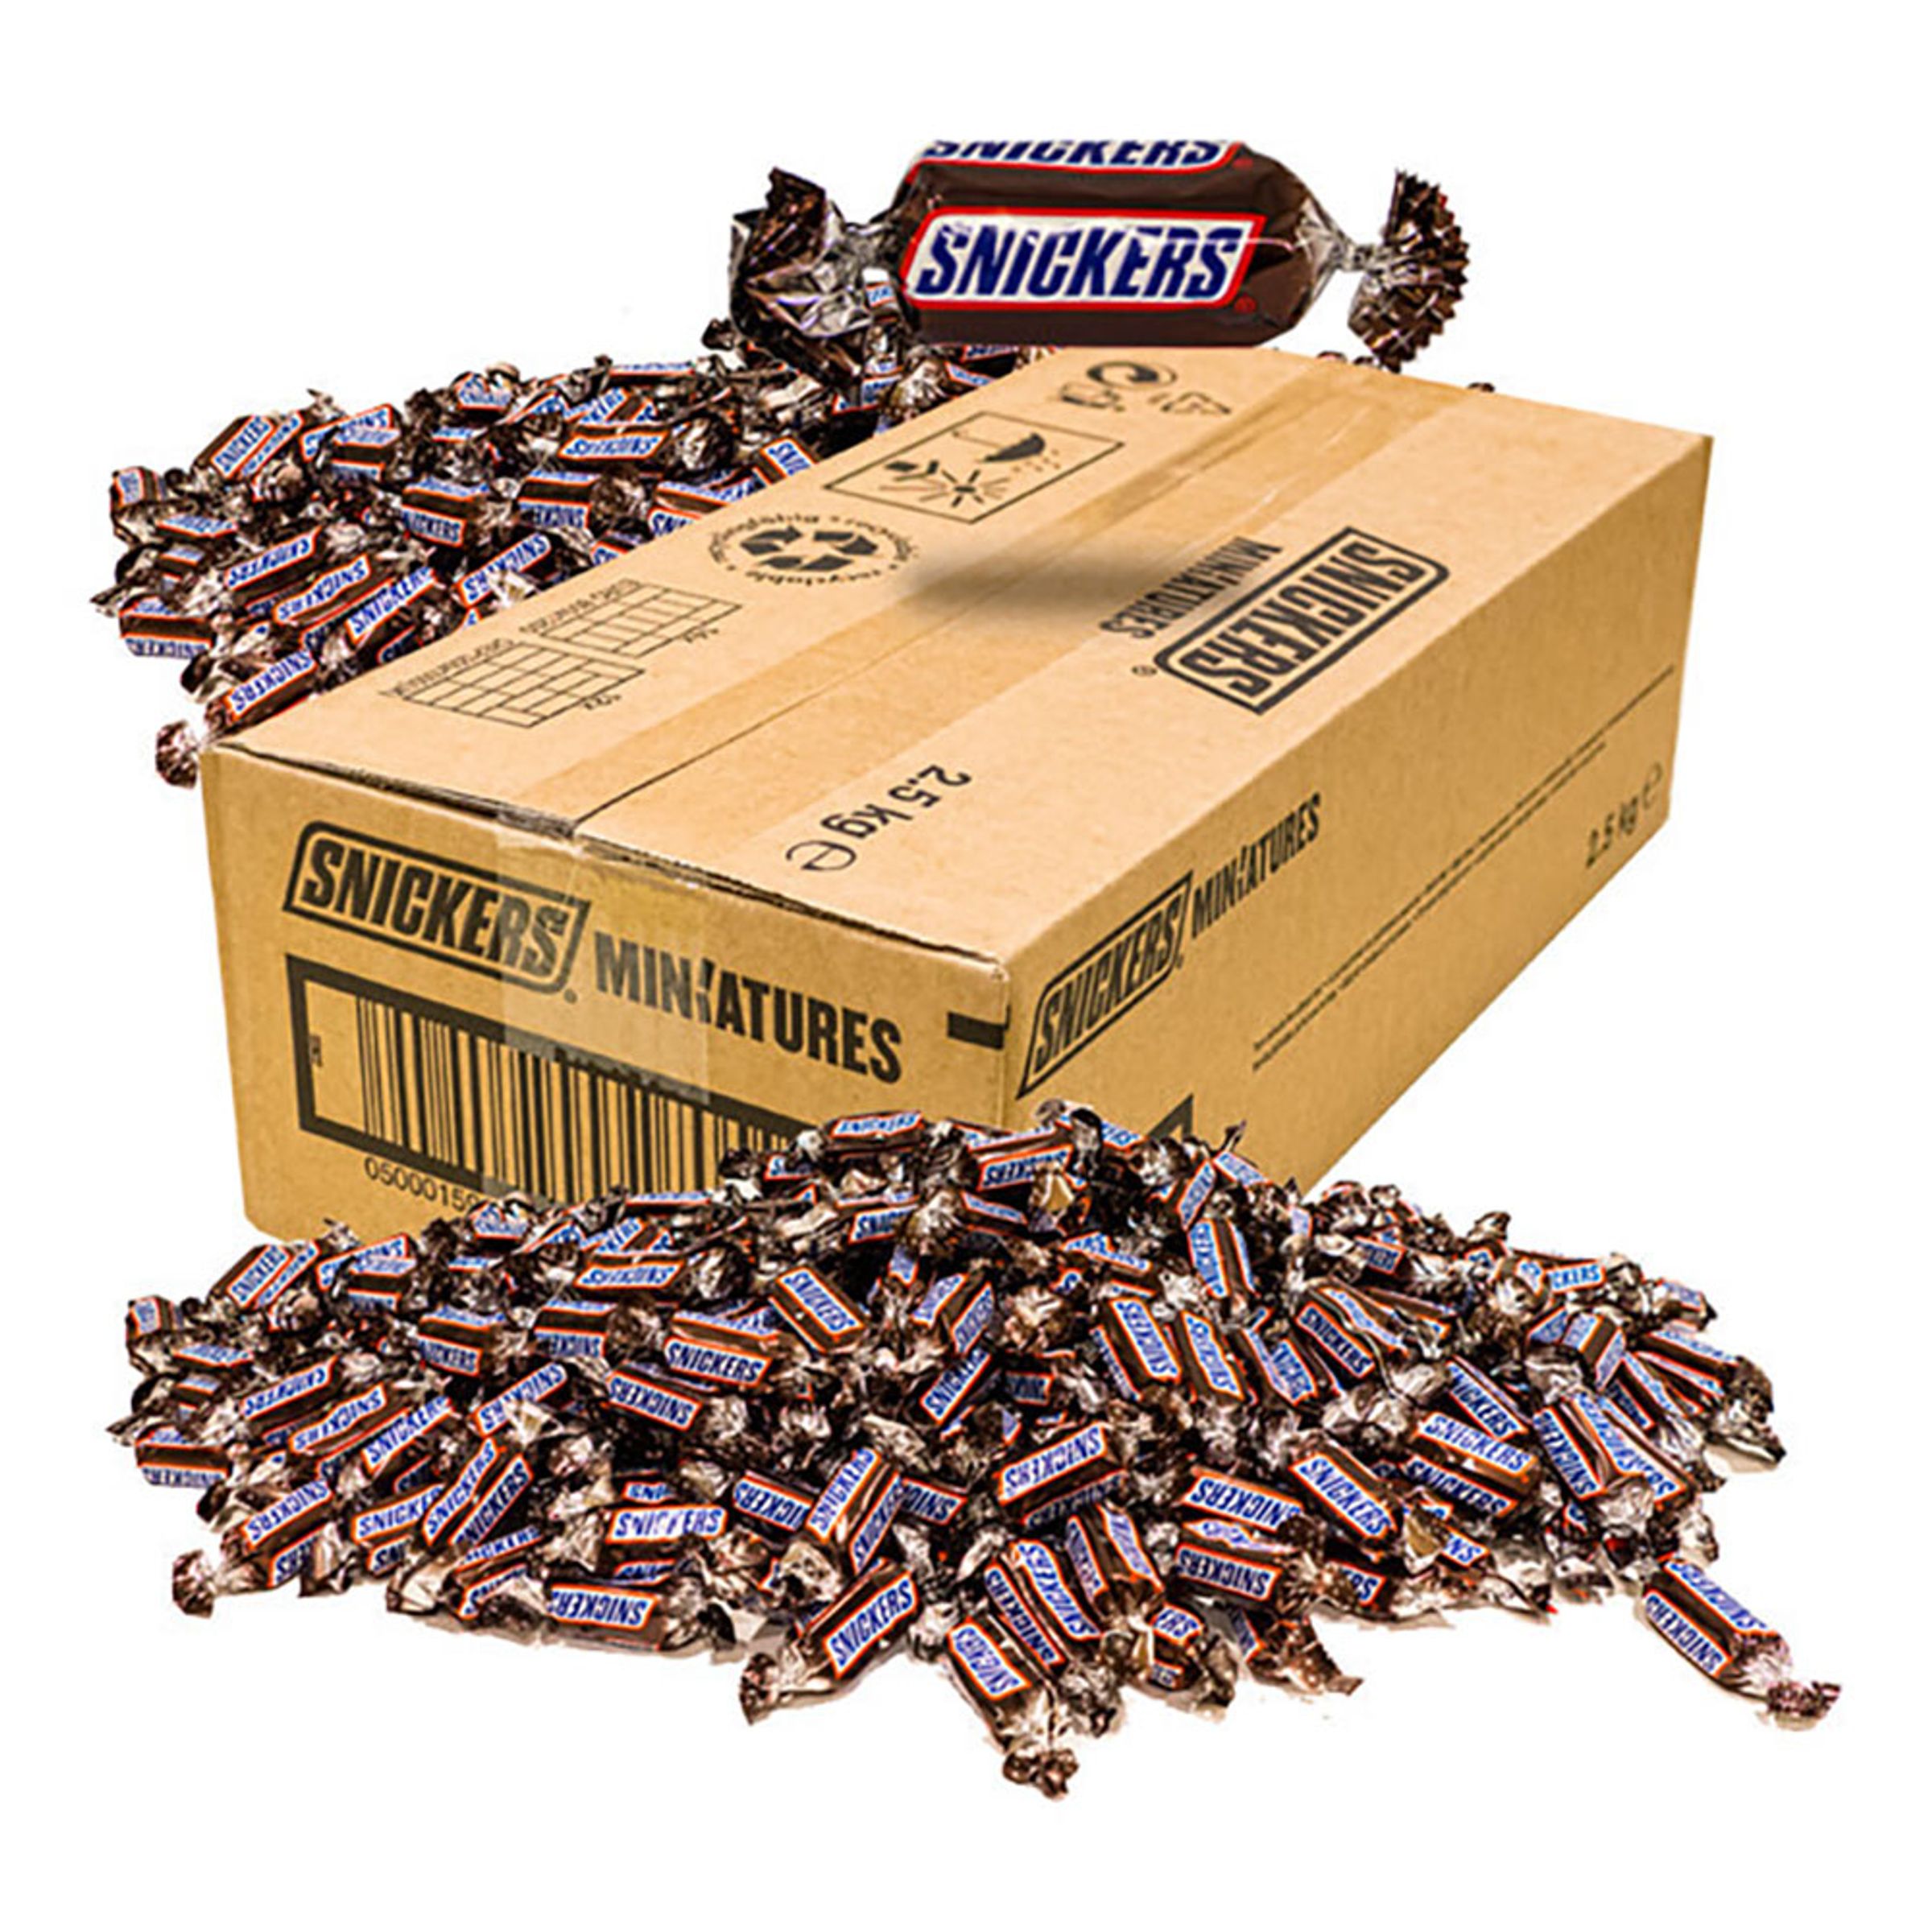 Snickers Miniatures Storpack - 2,5 kg